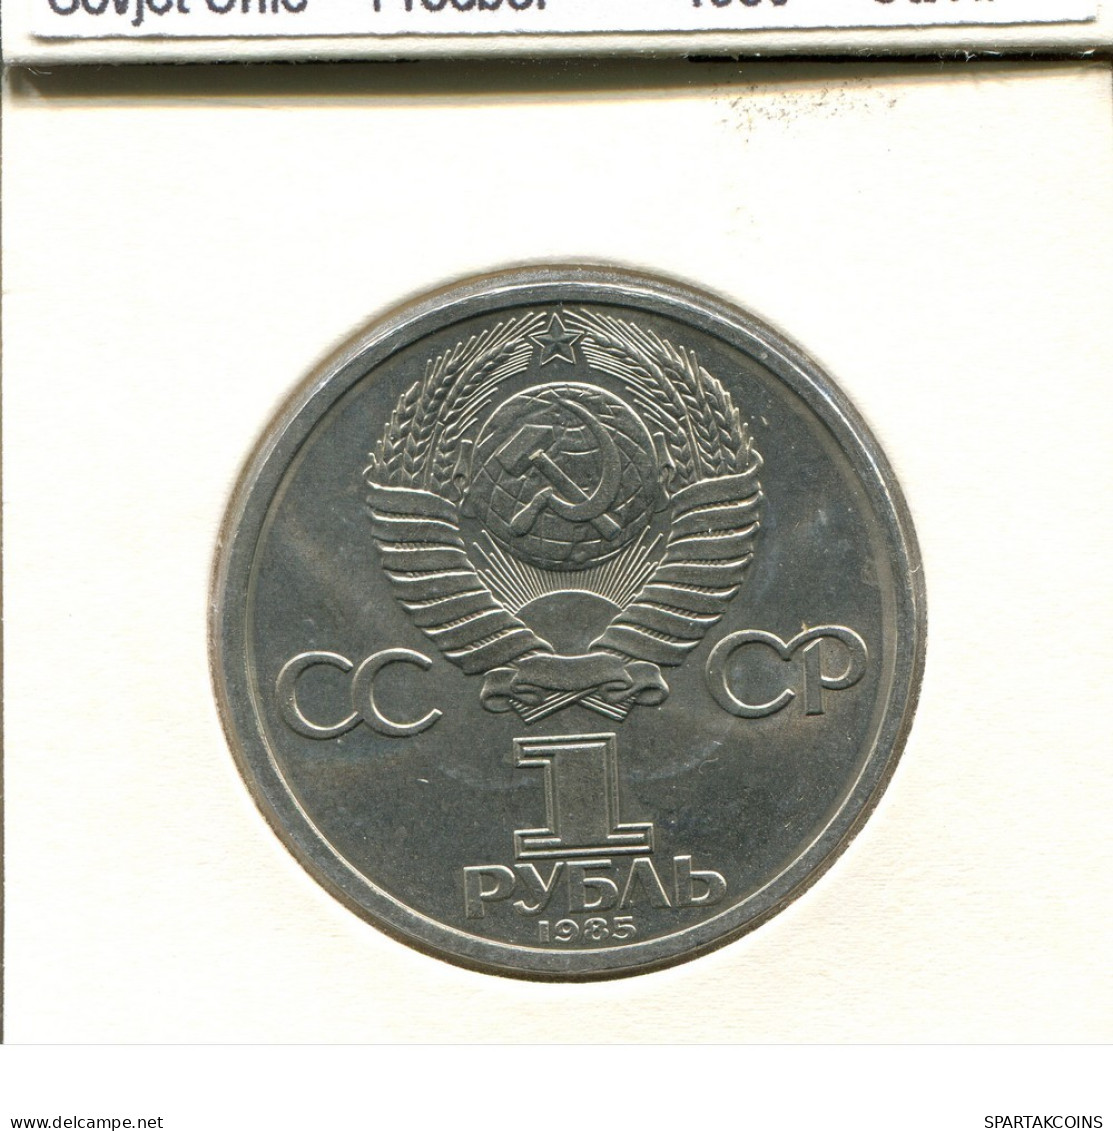 1 ROUBLE 1985 RUSSLAND RUSSIA USSR Münze #AS665.D.A - Russland